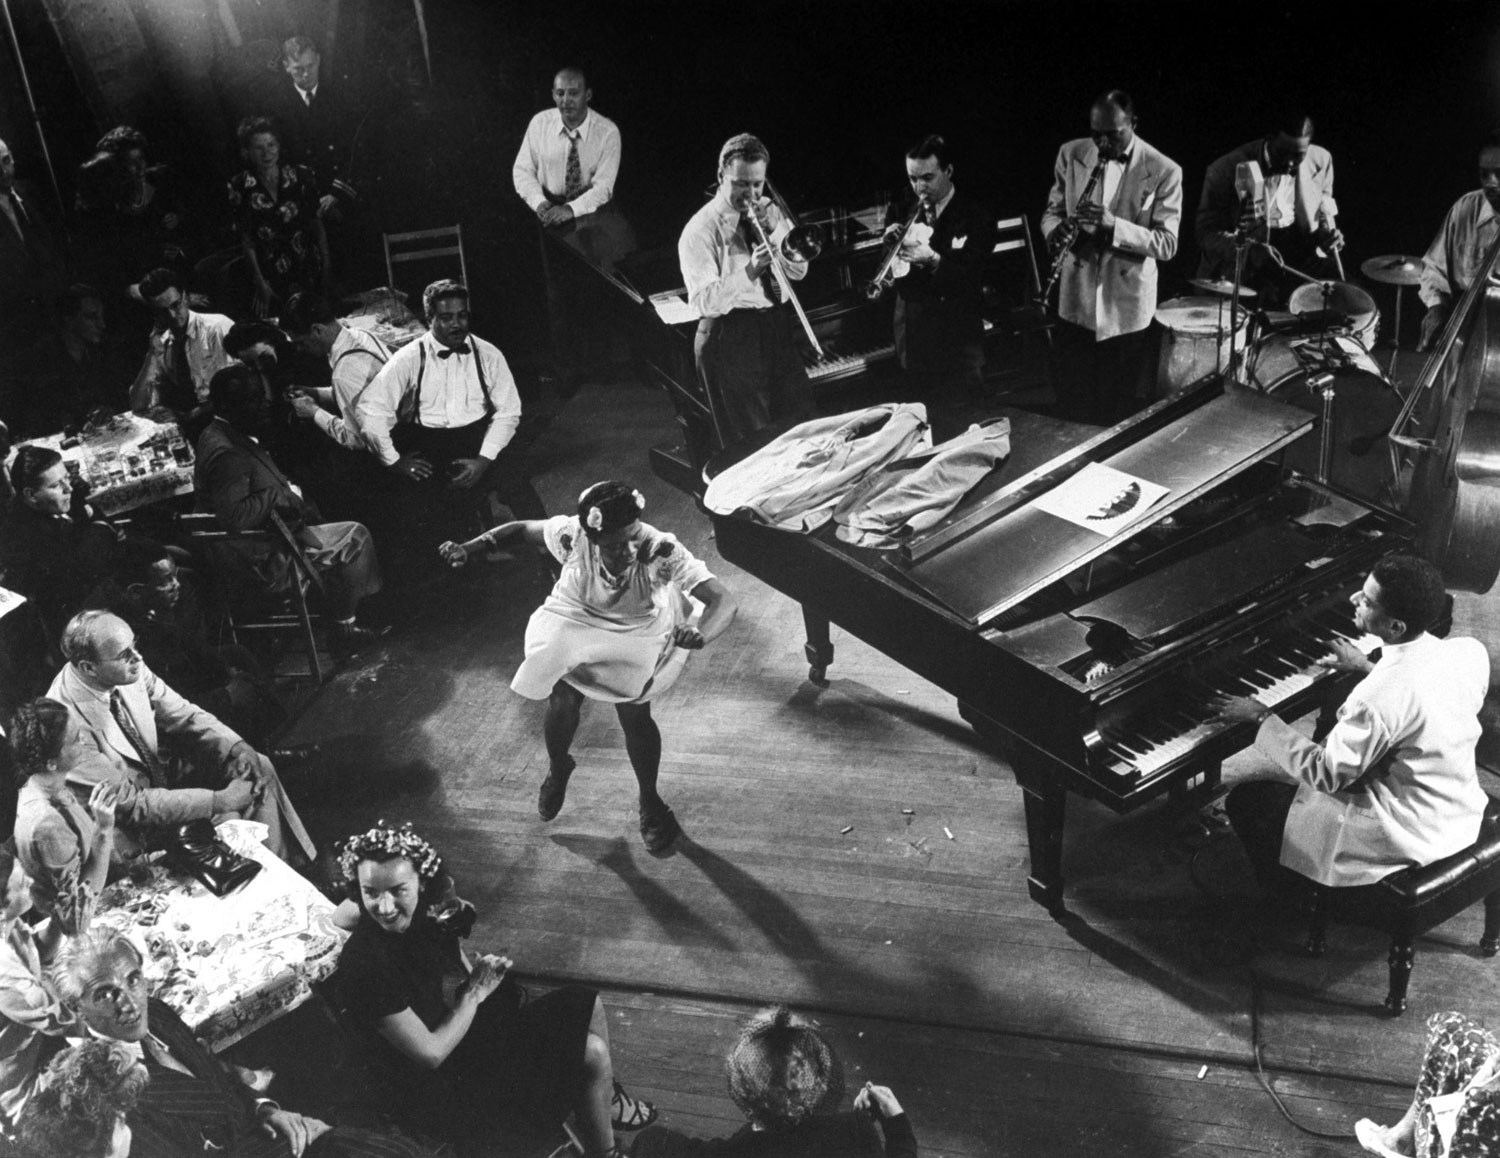 Pearl Primus performs to "Honeysuckle Rose" as played by an all-star group consisting of Teddy Wilson (piano), Lou McGarity (trombone), Sidney Catlett (drums), Bobby Hackett (trumpet) and John Simons (bass).